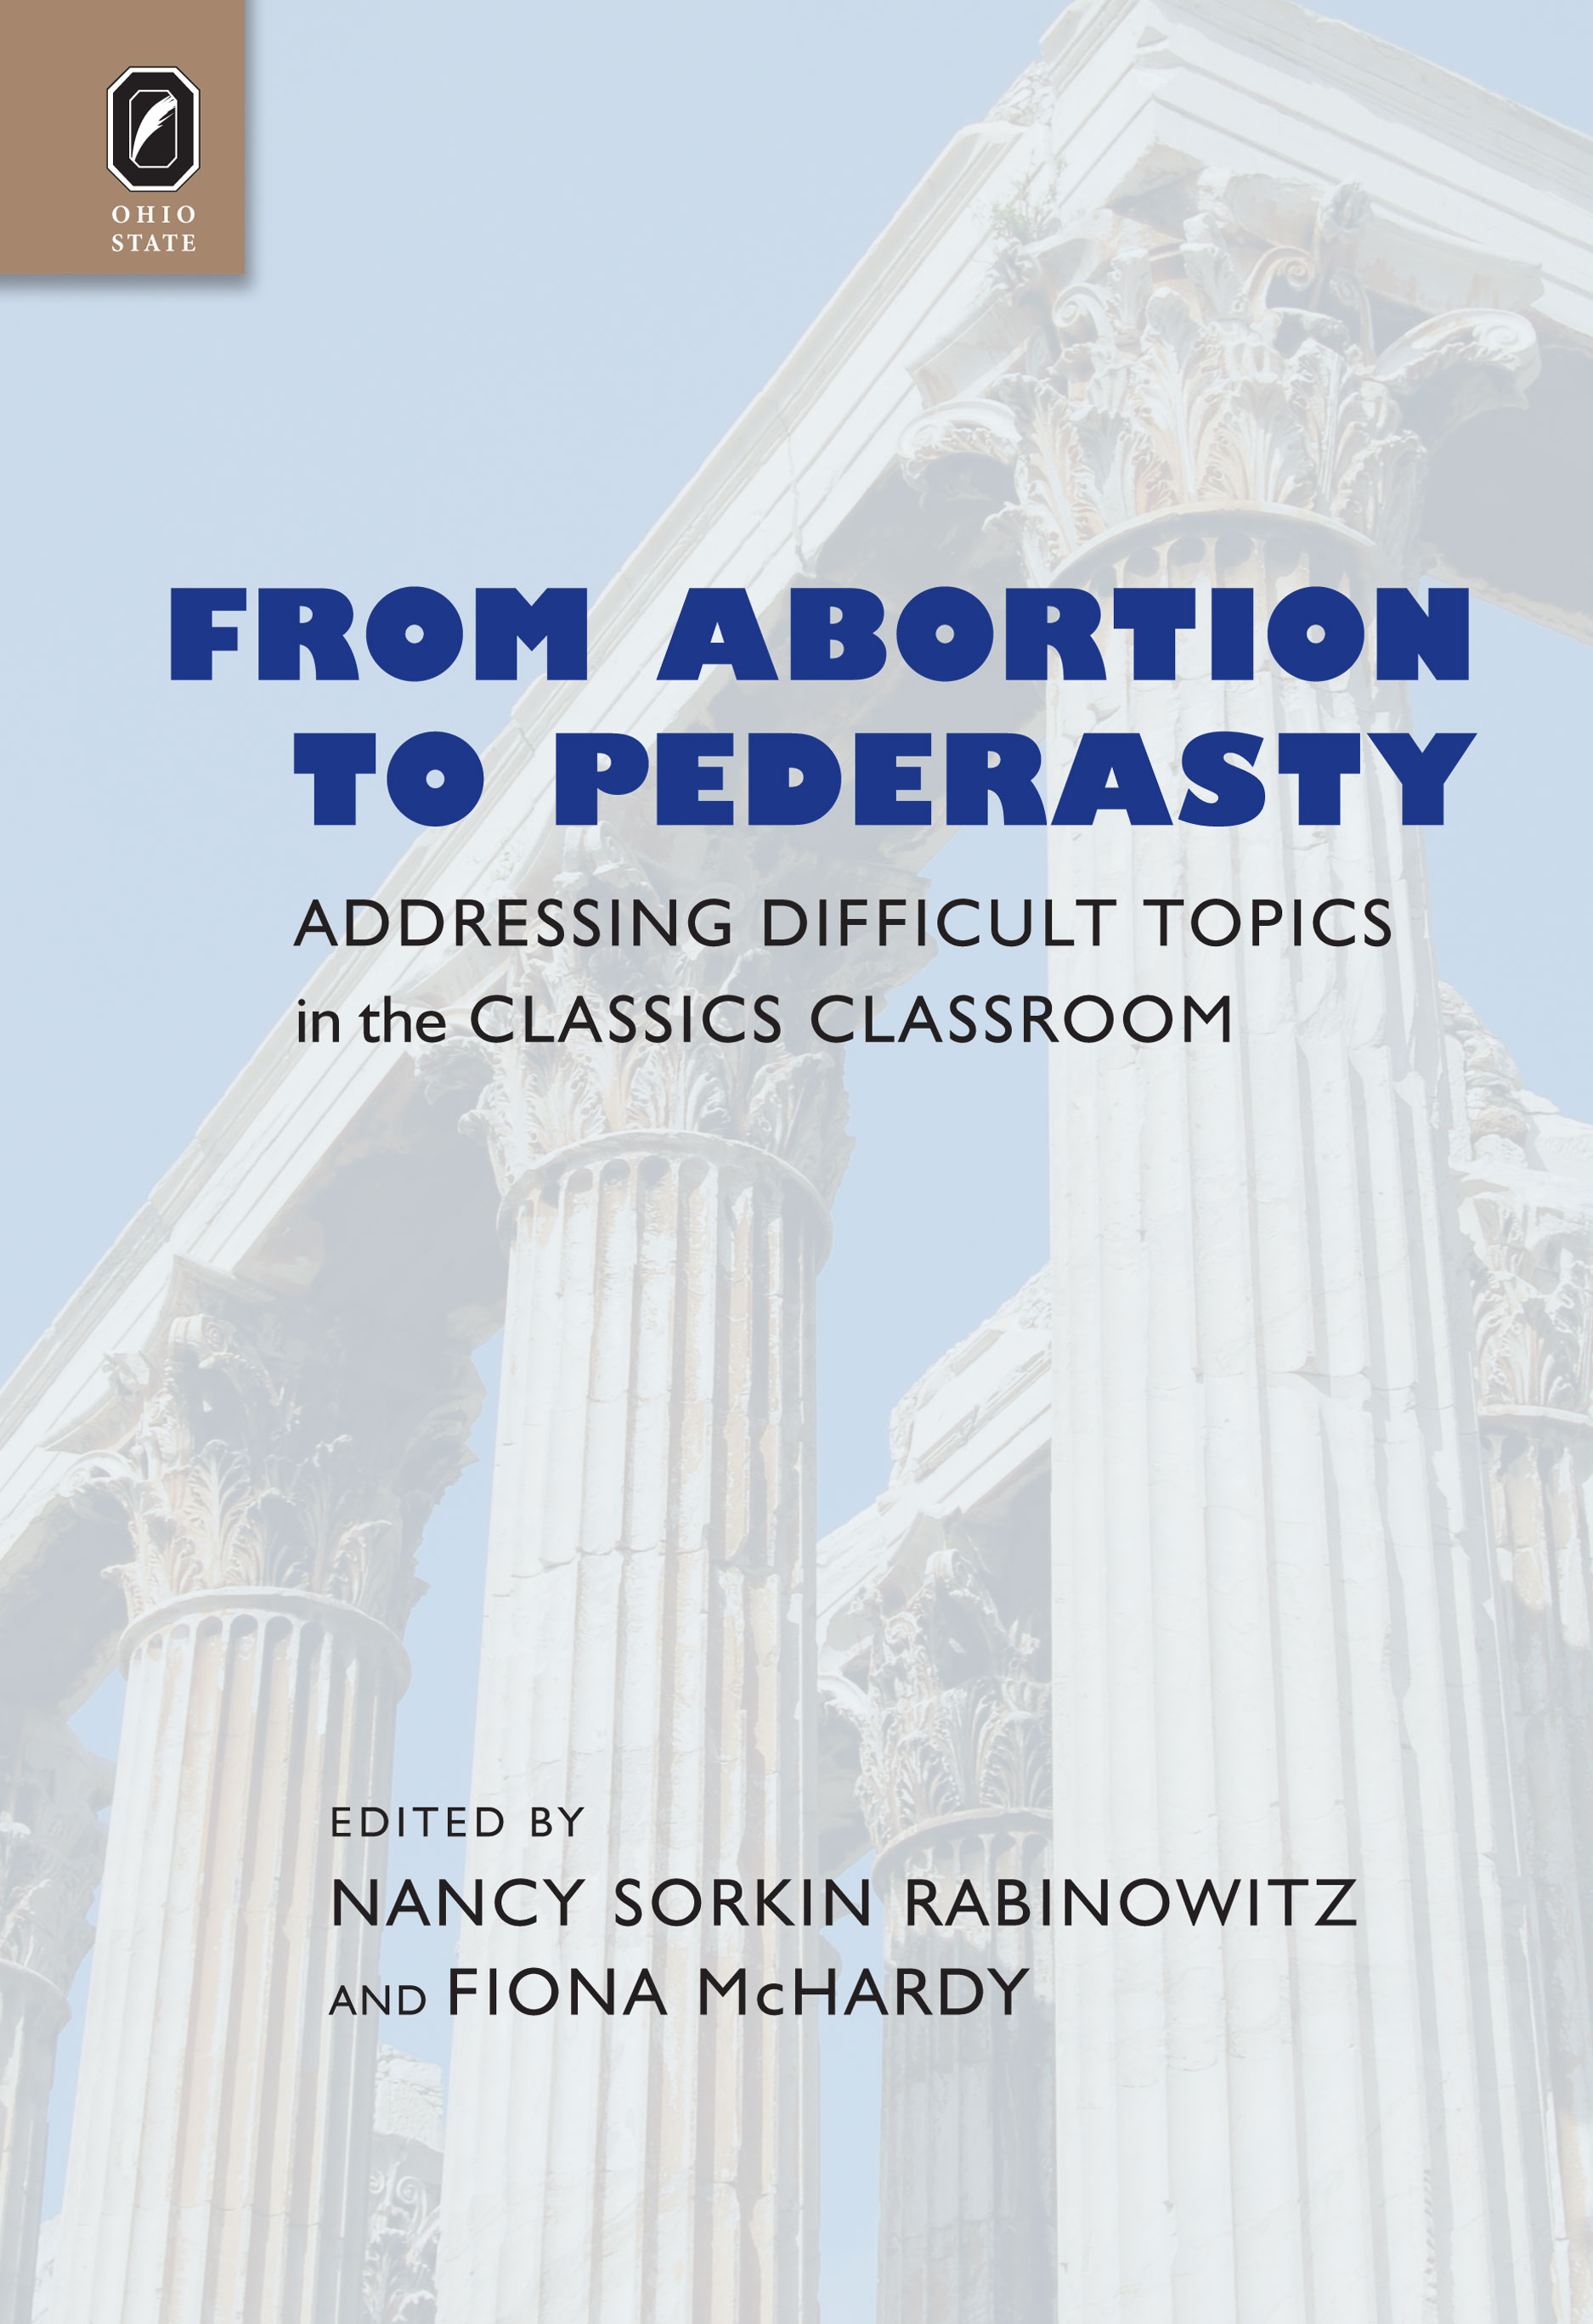 Cover for 2015 winning book of the Teaching Literature Book Award:  From Abortion to Pederasty: Addressing Difficult Topics in the Classics Classroom.